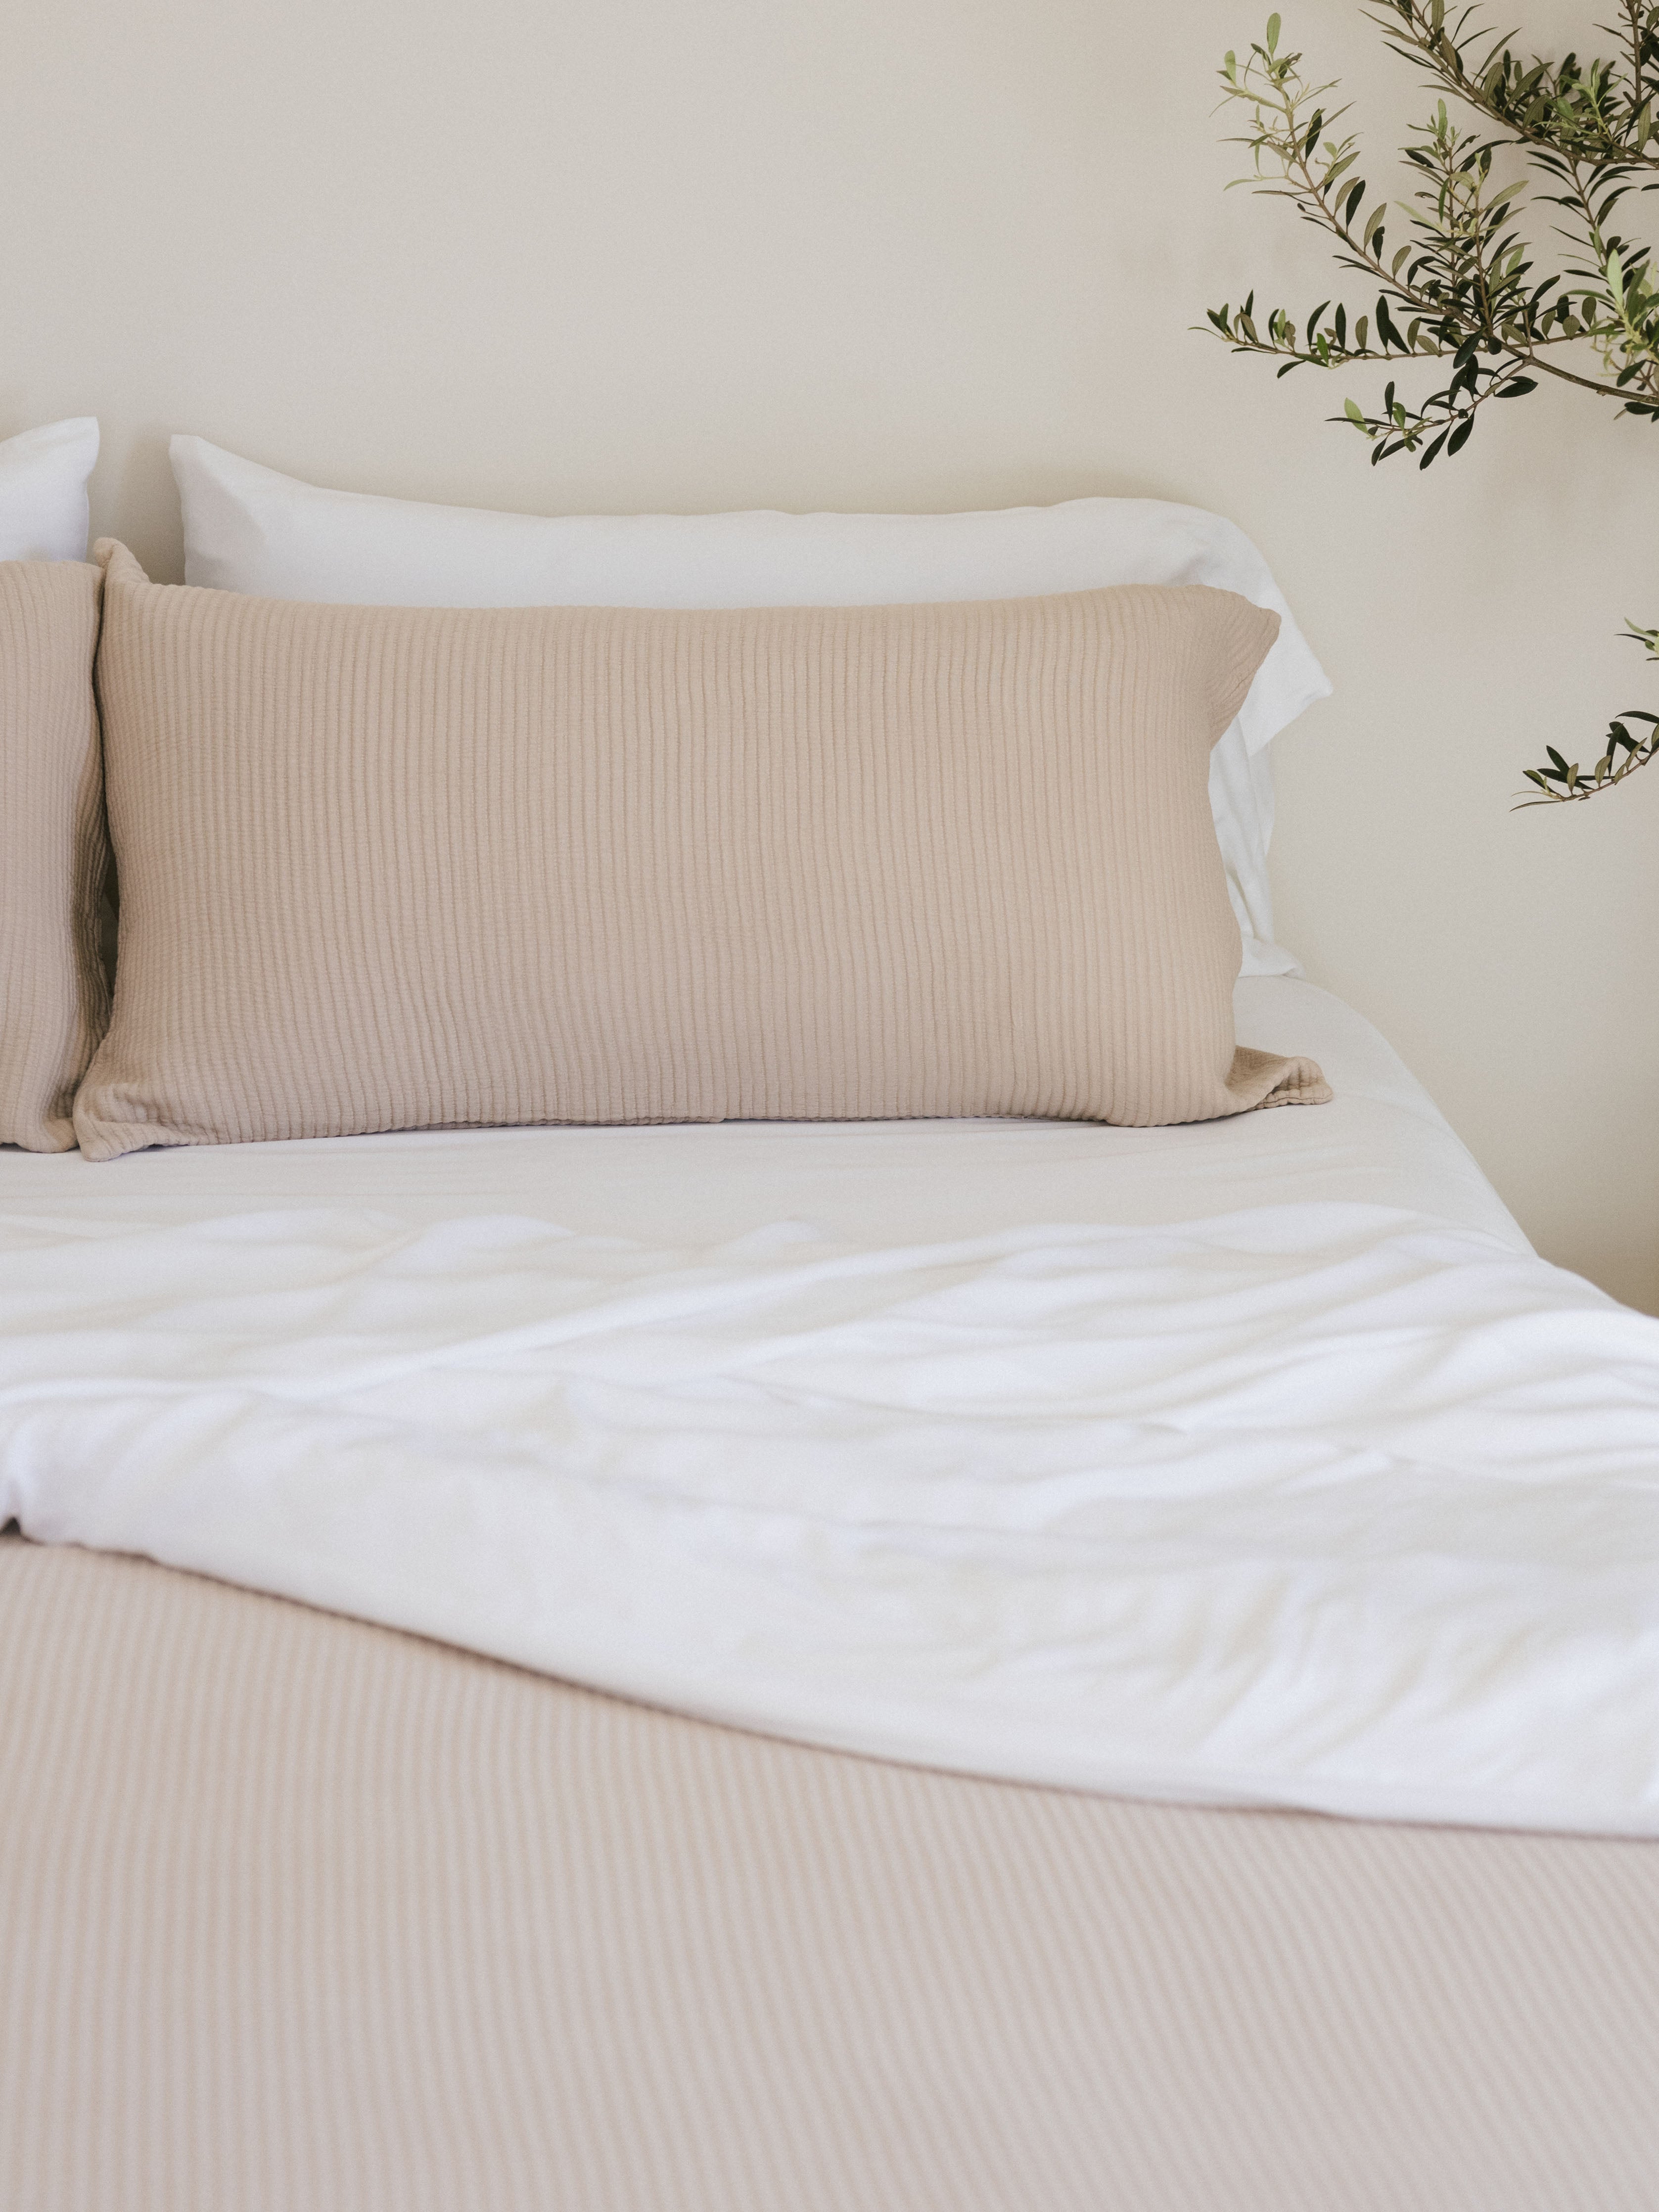 Driftwood coverlet and coverlet shams on white bed |Color:Driftwood